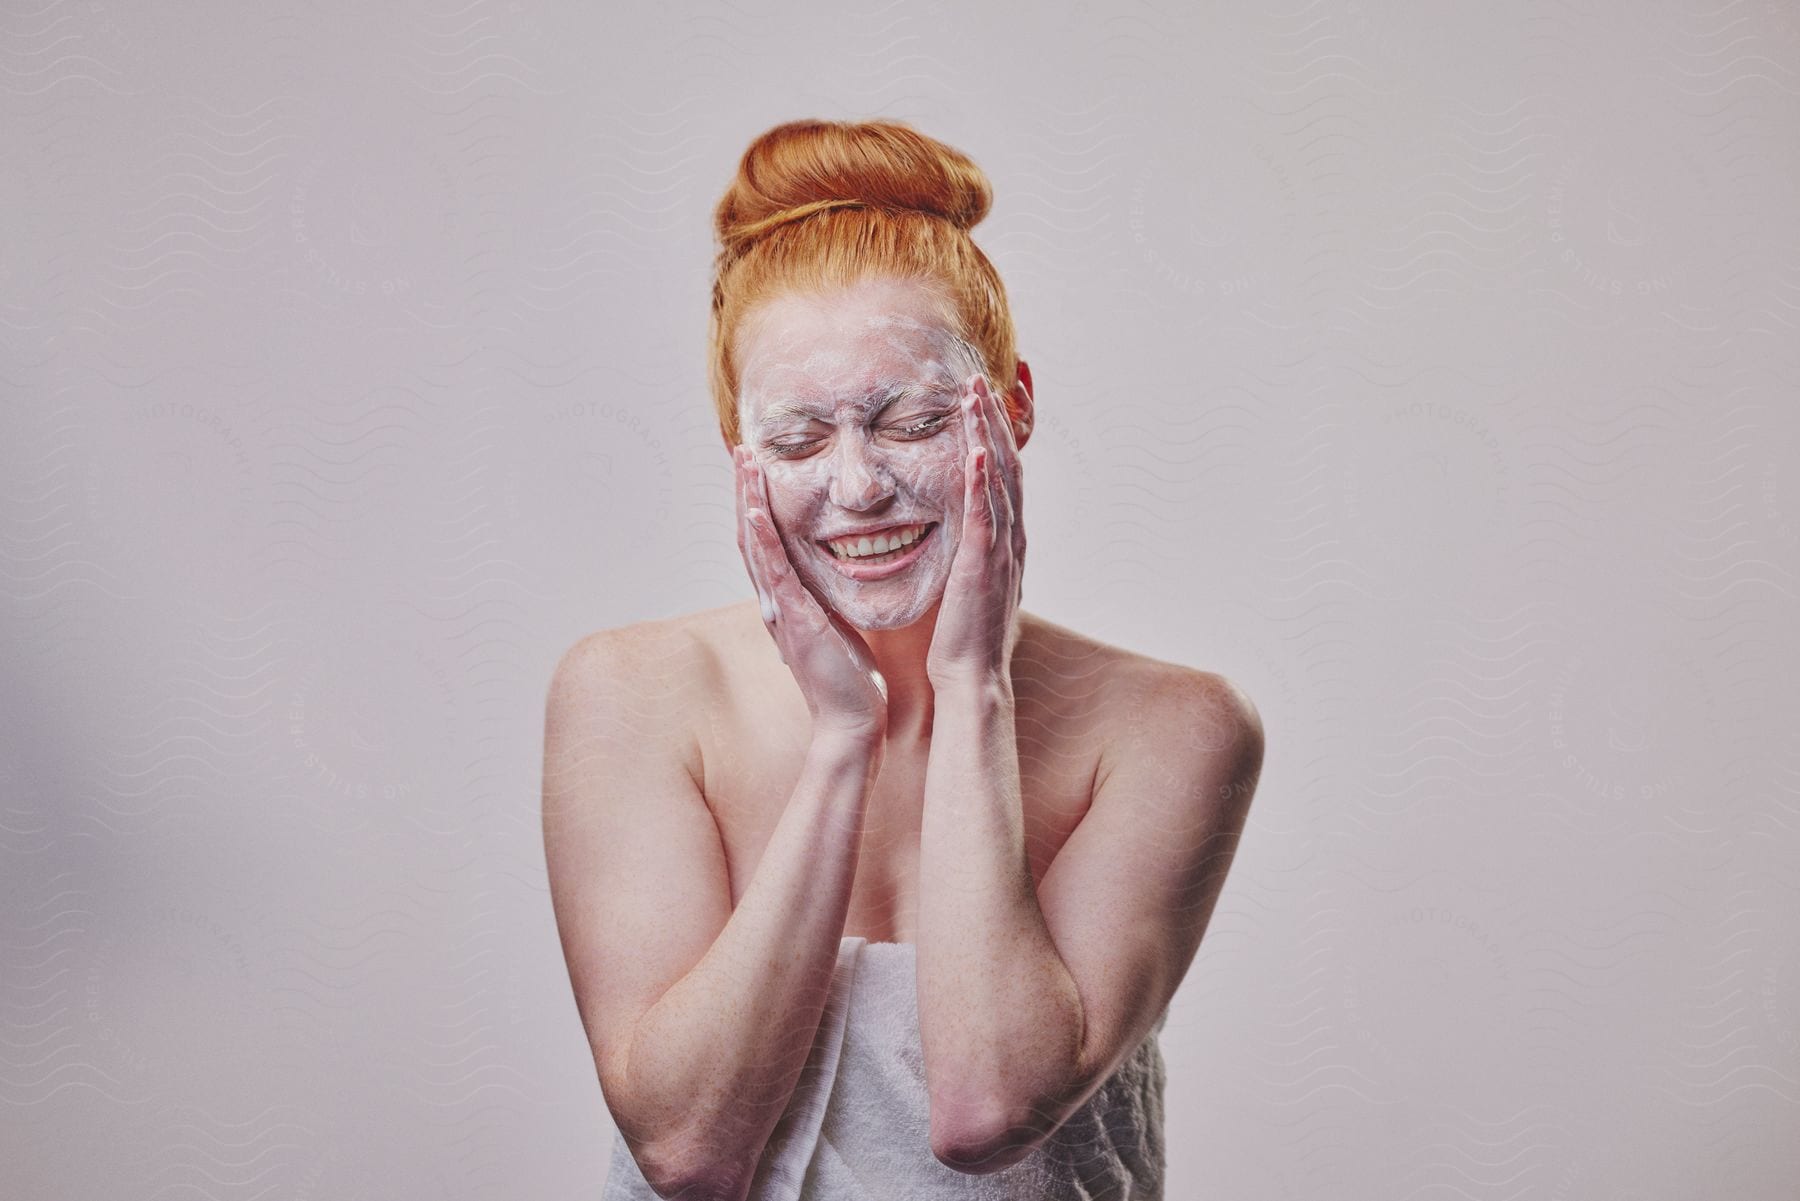 A woman with a bath towel and soap on her face smiles, her eyes closed and her hands flat against her face.